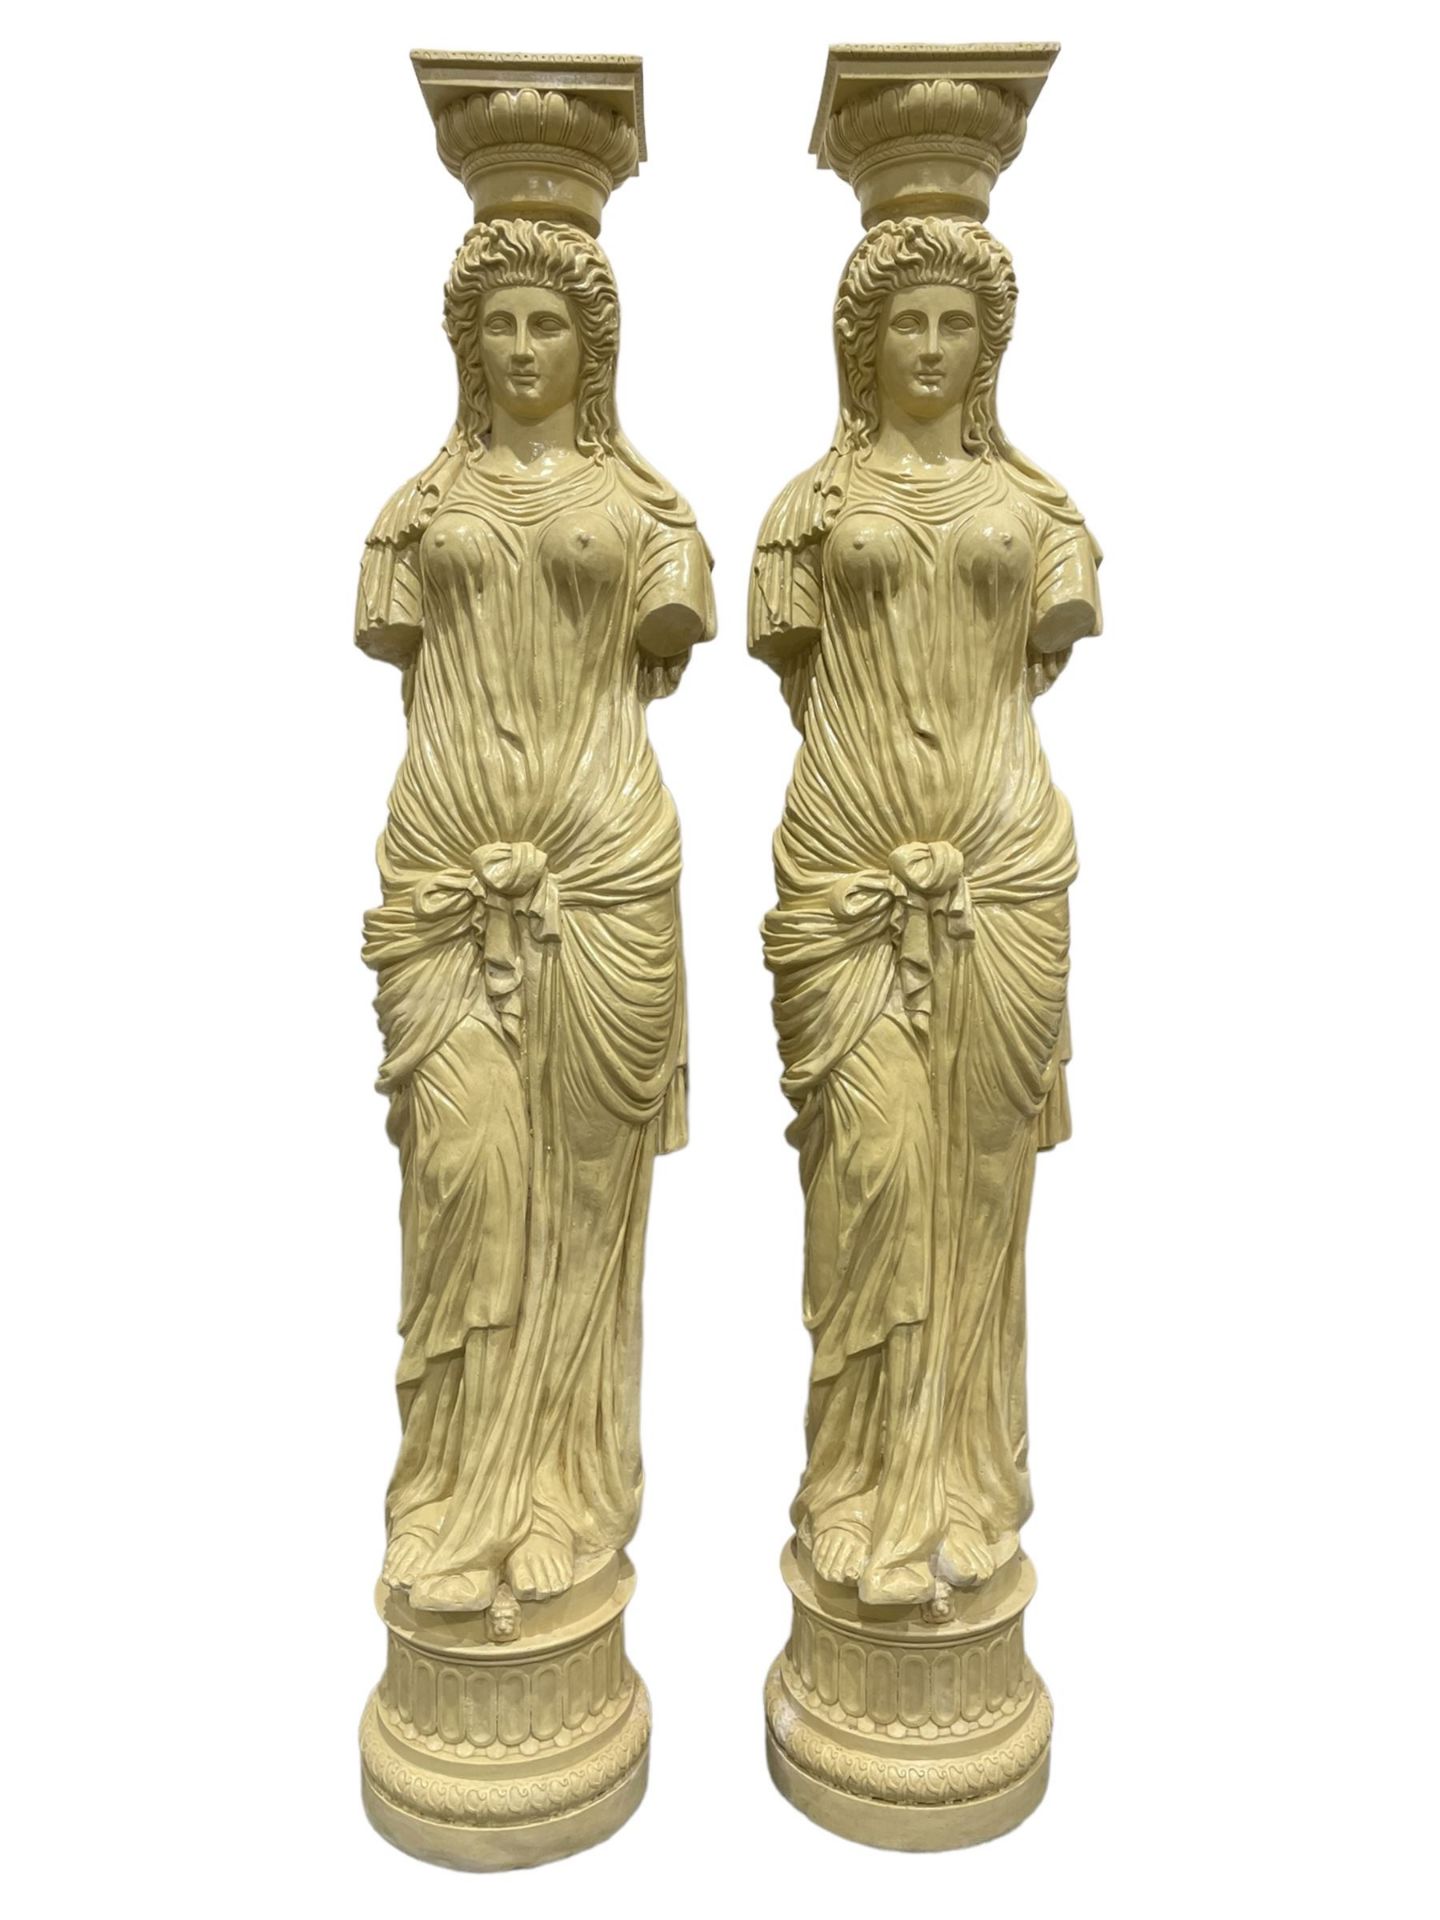 A Pair of Greek style caryatid columns, square top with gadroon underbelly, the semi-nude female